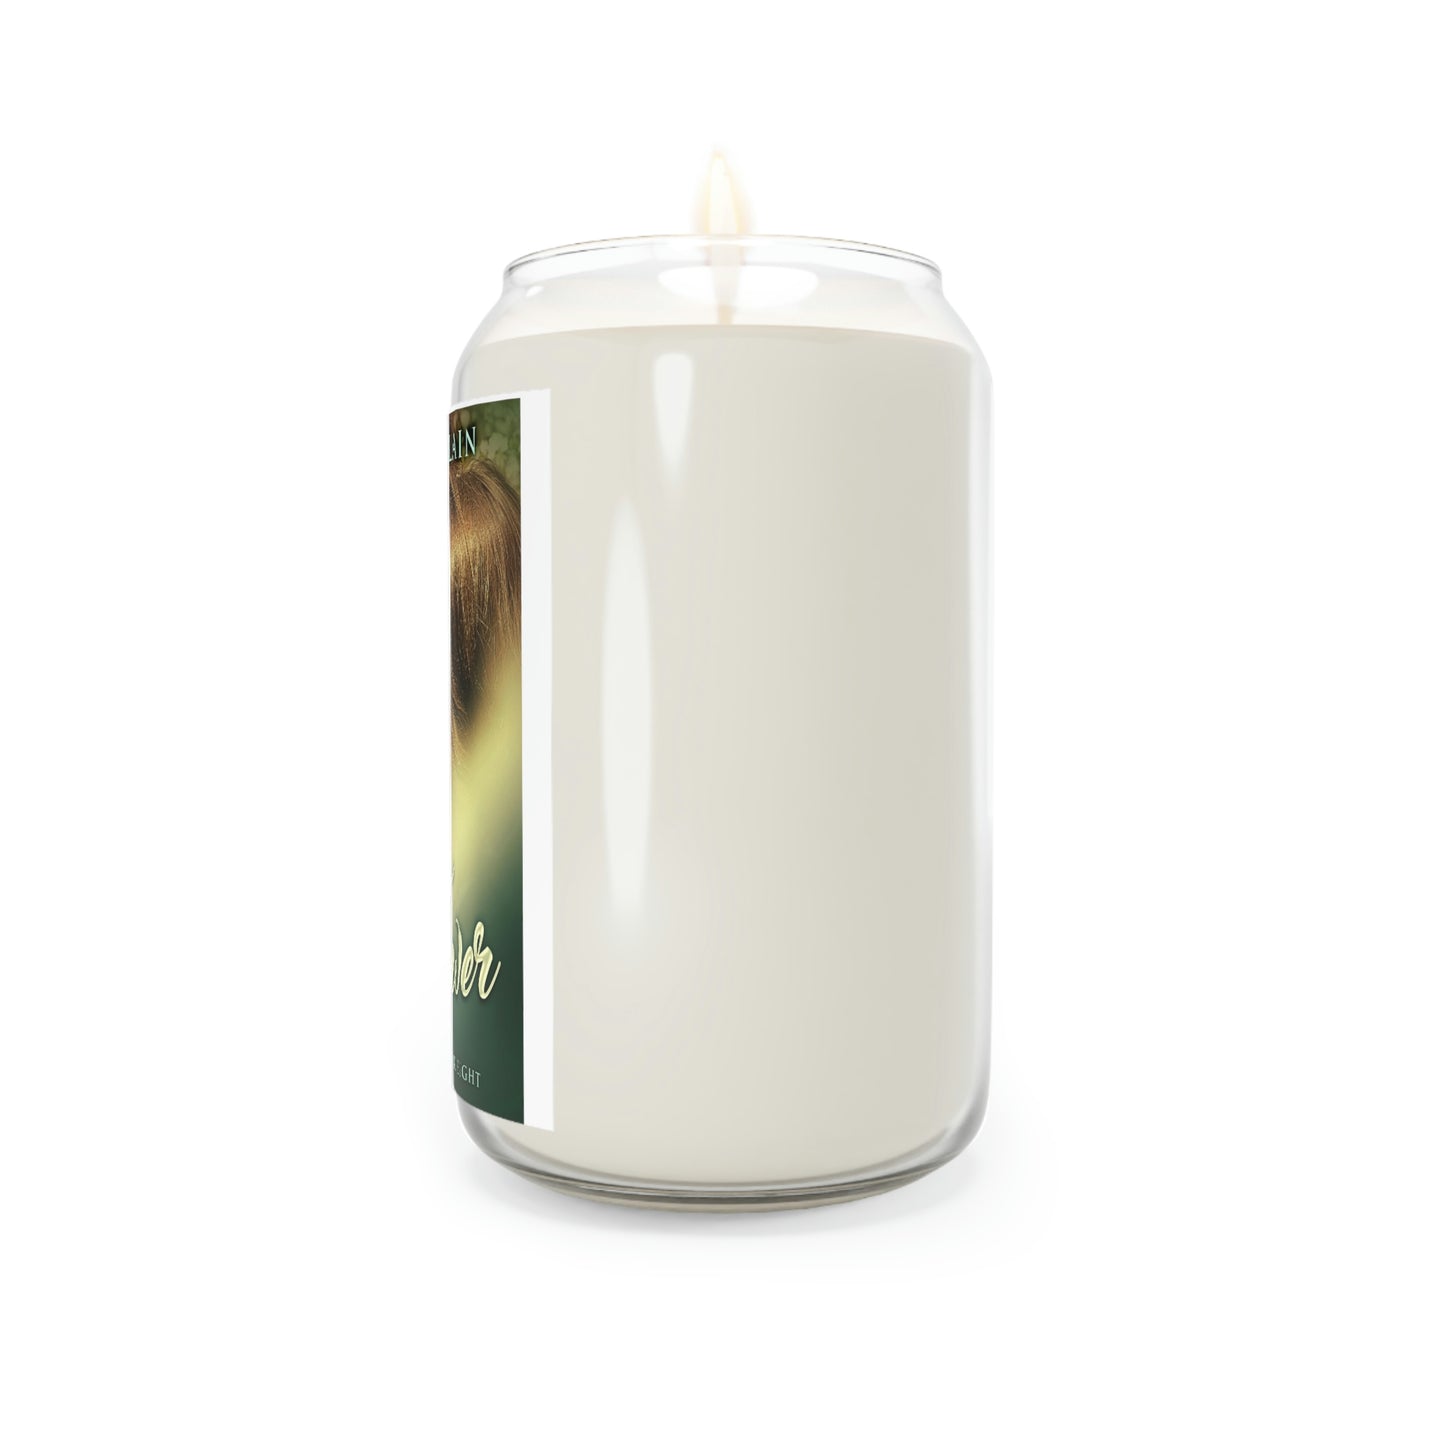 Love's Answer - Scented Candle